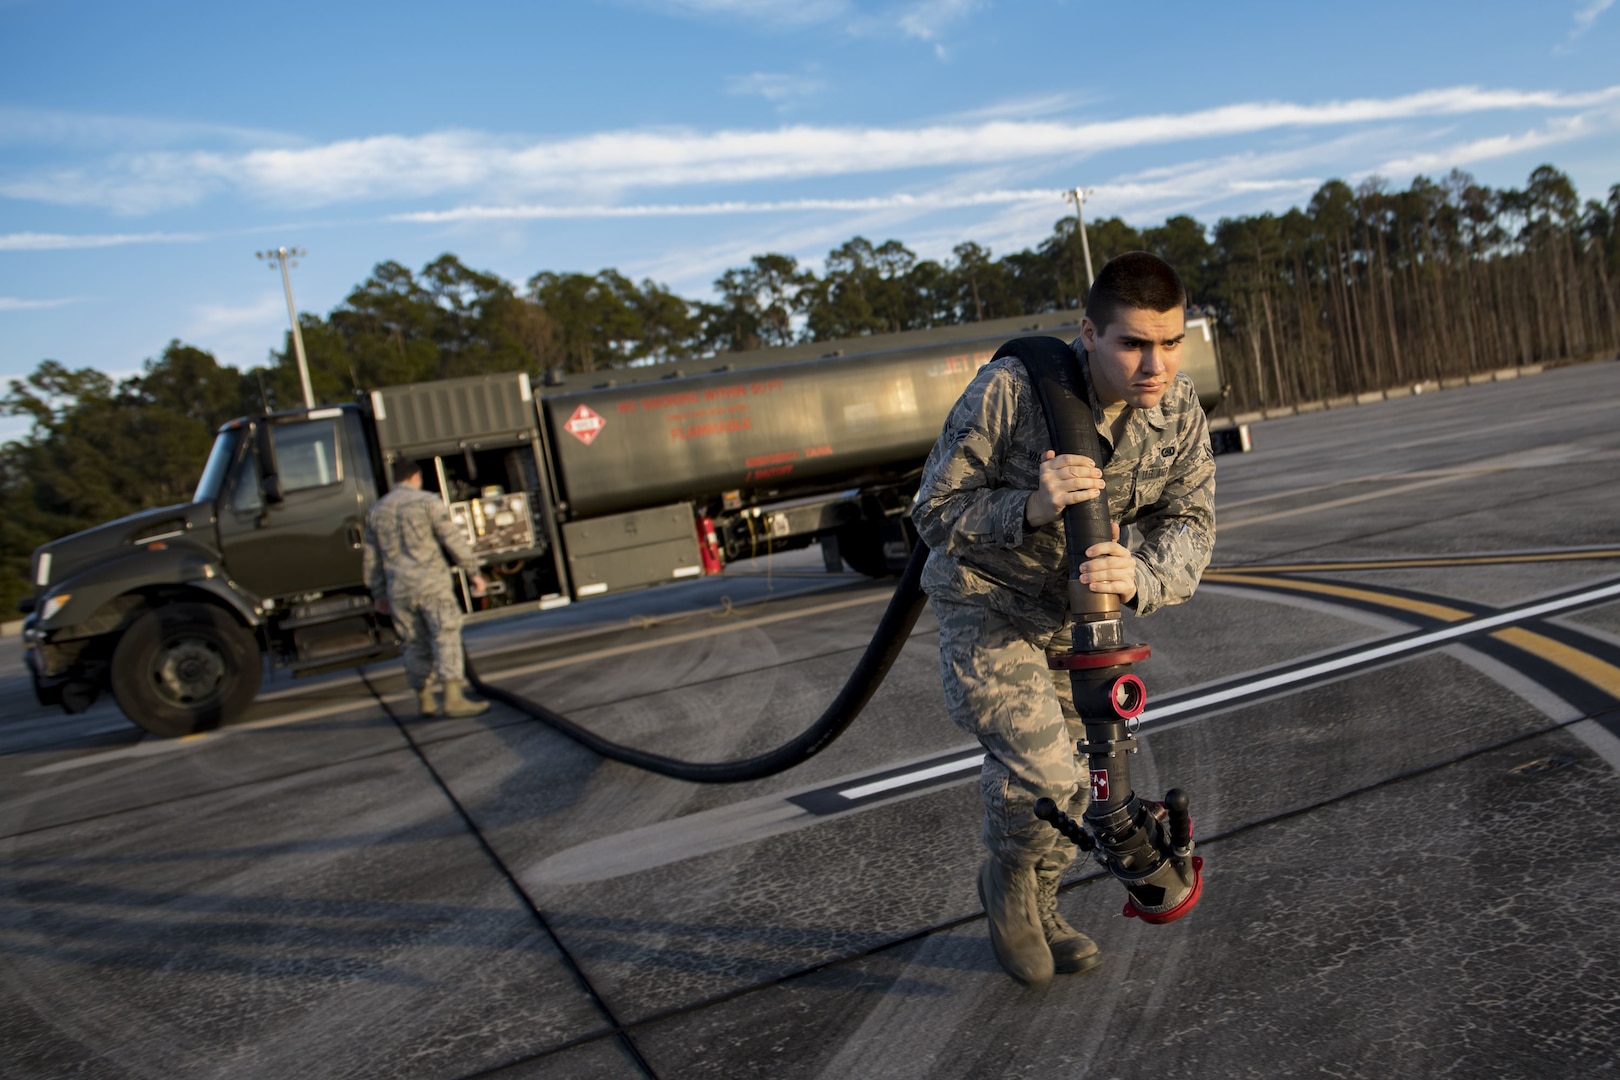 Airman 1st Class Evan Valance, 23d Logistics Readiness Squadron fuels distribution operator, drags a fuel hose away from an M-11 refueling truck to conduct HH-60G Pave Hawk hot-pit refueling operations, Jan. 16, 2018 at Moody Air Force Base, Ga. Airmen who work in the petroleum, oils and lubricants (POL) flight frequently use hot pit refueling, which is a more efficient tactic that allows aircrews a quick transition from the flight line back to their current objective. (U.S. Air Force photo by Senior Airman Daniel Snider)